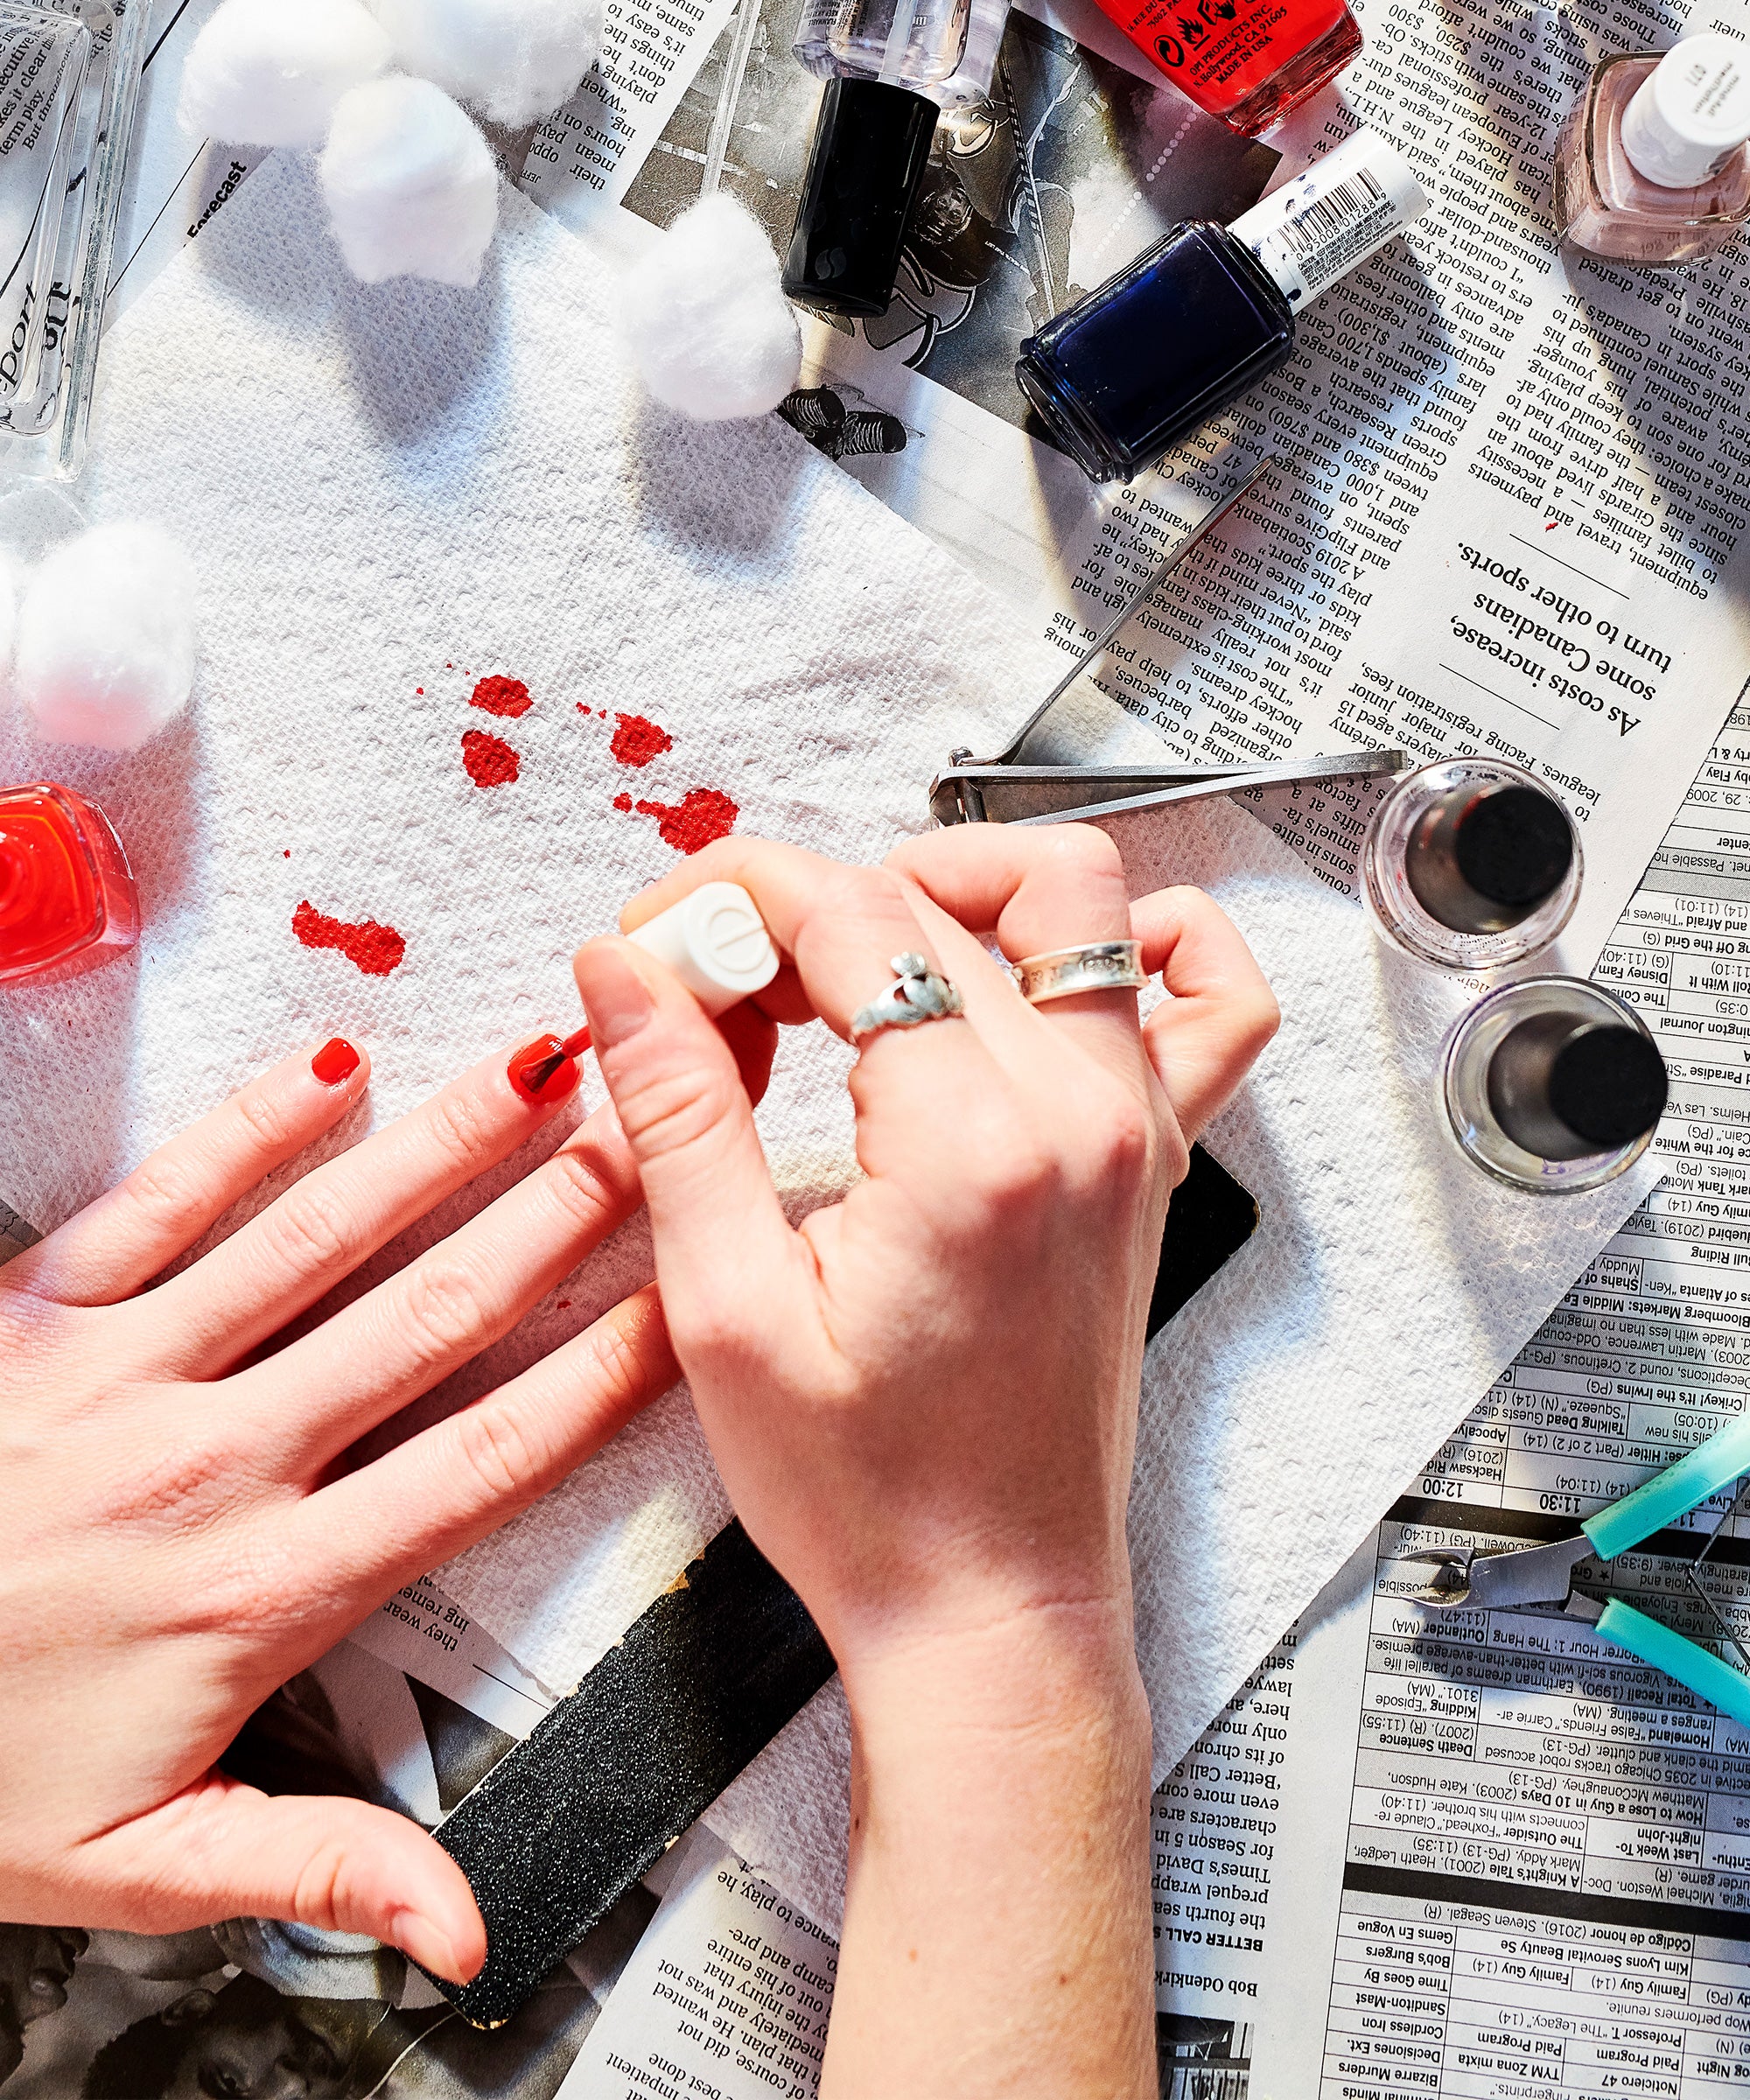 Makeup Tips — How to Pick a Top Trending Nail Polish Shade to...